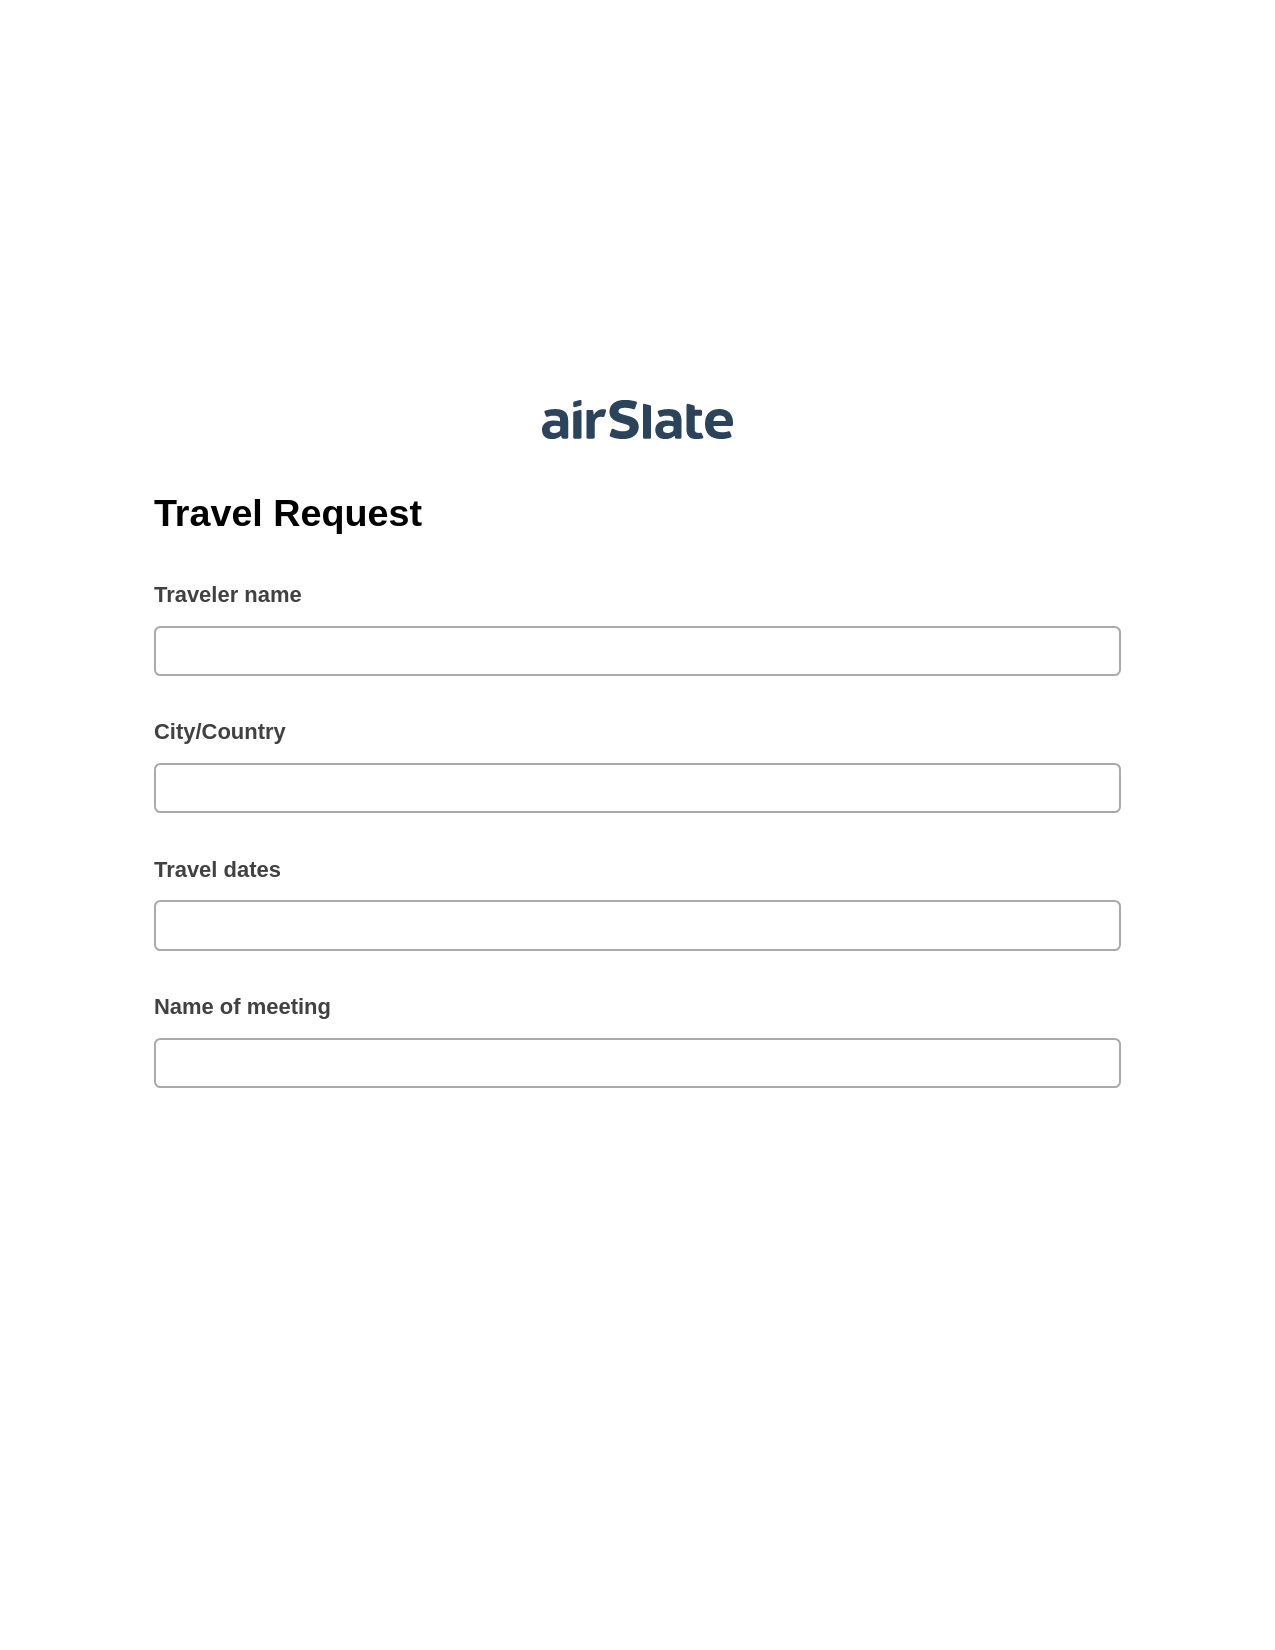 Travel Request Pre-fill from Excel Spreadsheet Bot, Email Notification Bot, Google Drive Bot